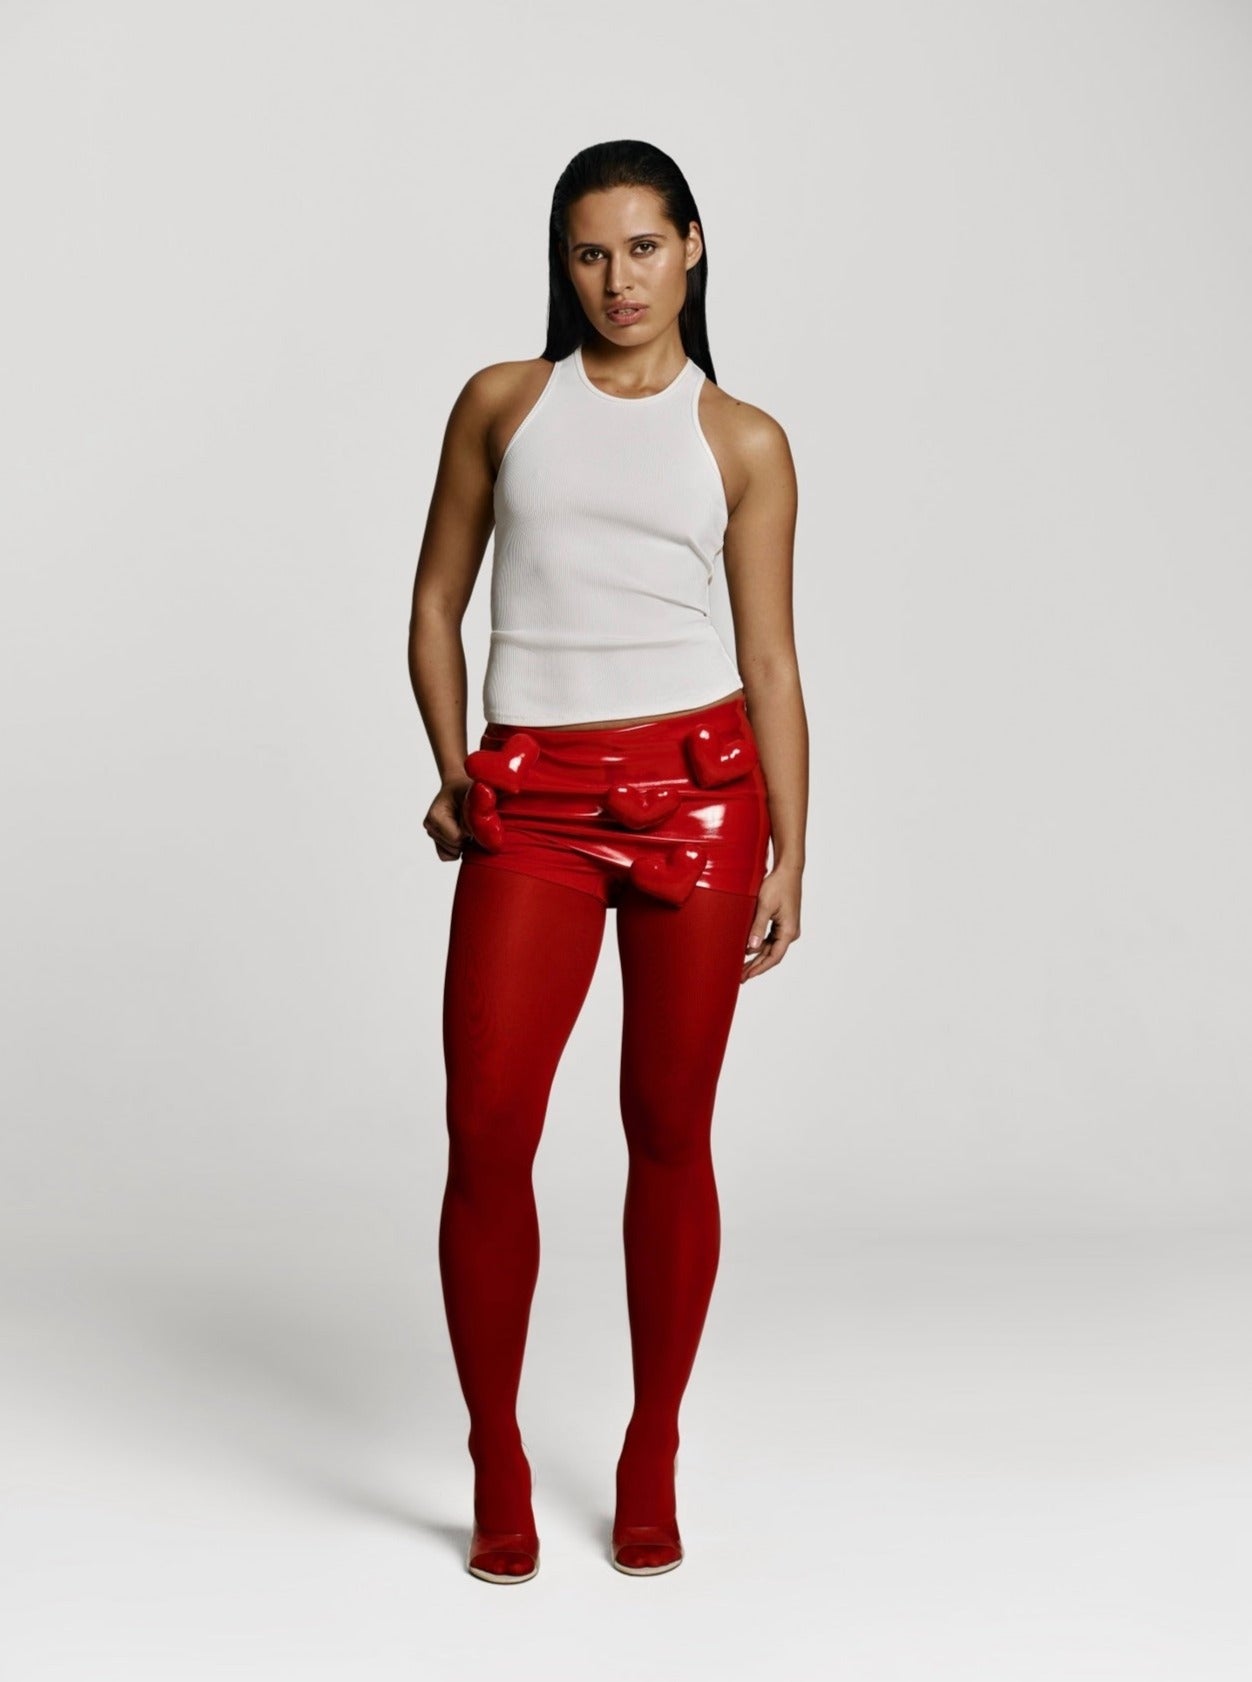 Full shot of a girl in a white viscose tank top, red patent vegan leather mini skort decorated with hearts and red tights